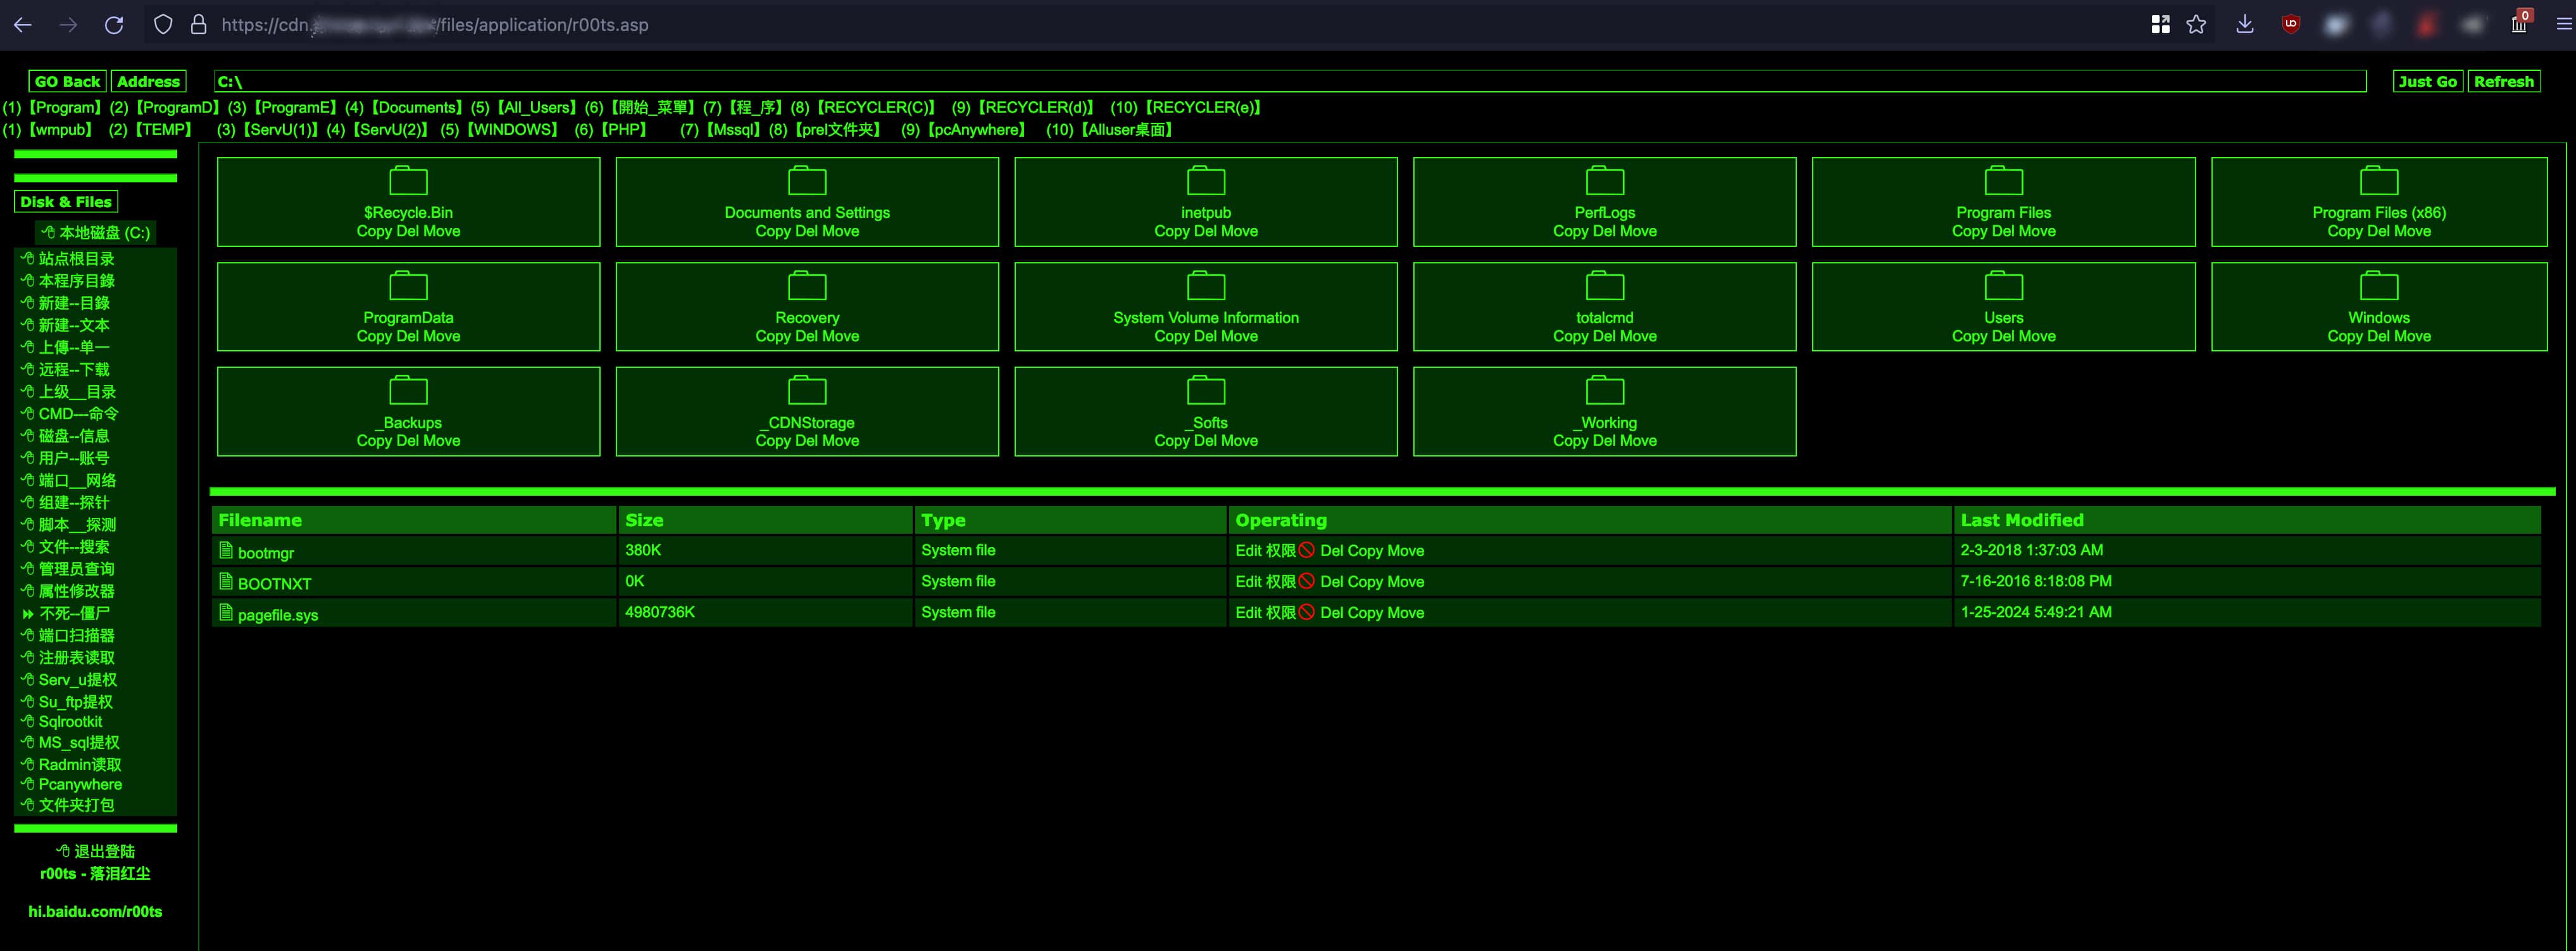 screenshot of the r00ts.asp webshell running on the jframework webserver. it is in green on black design and most ui text is in chinese